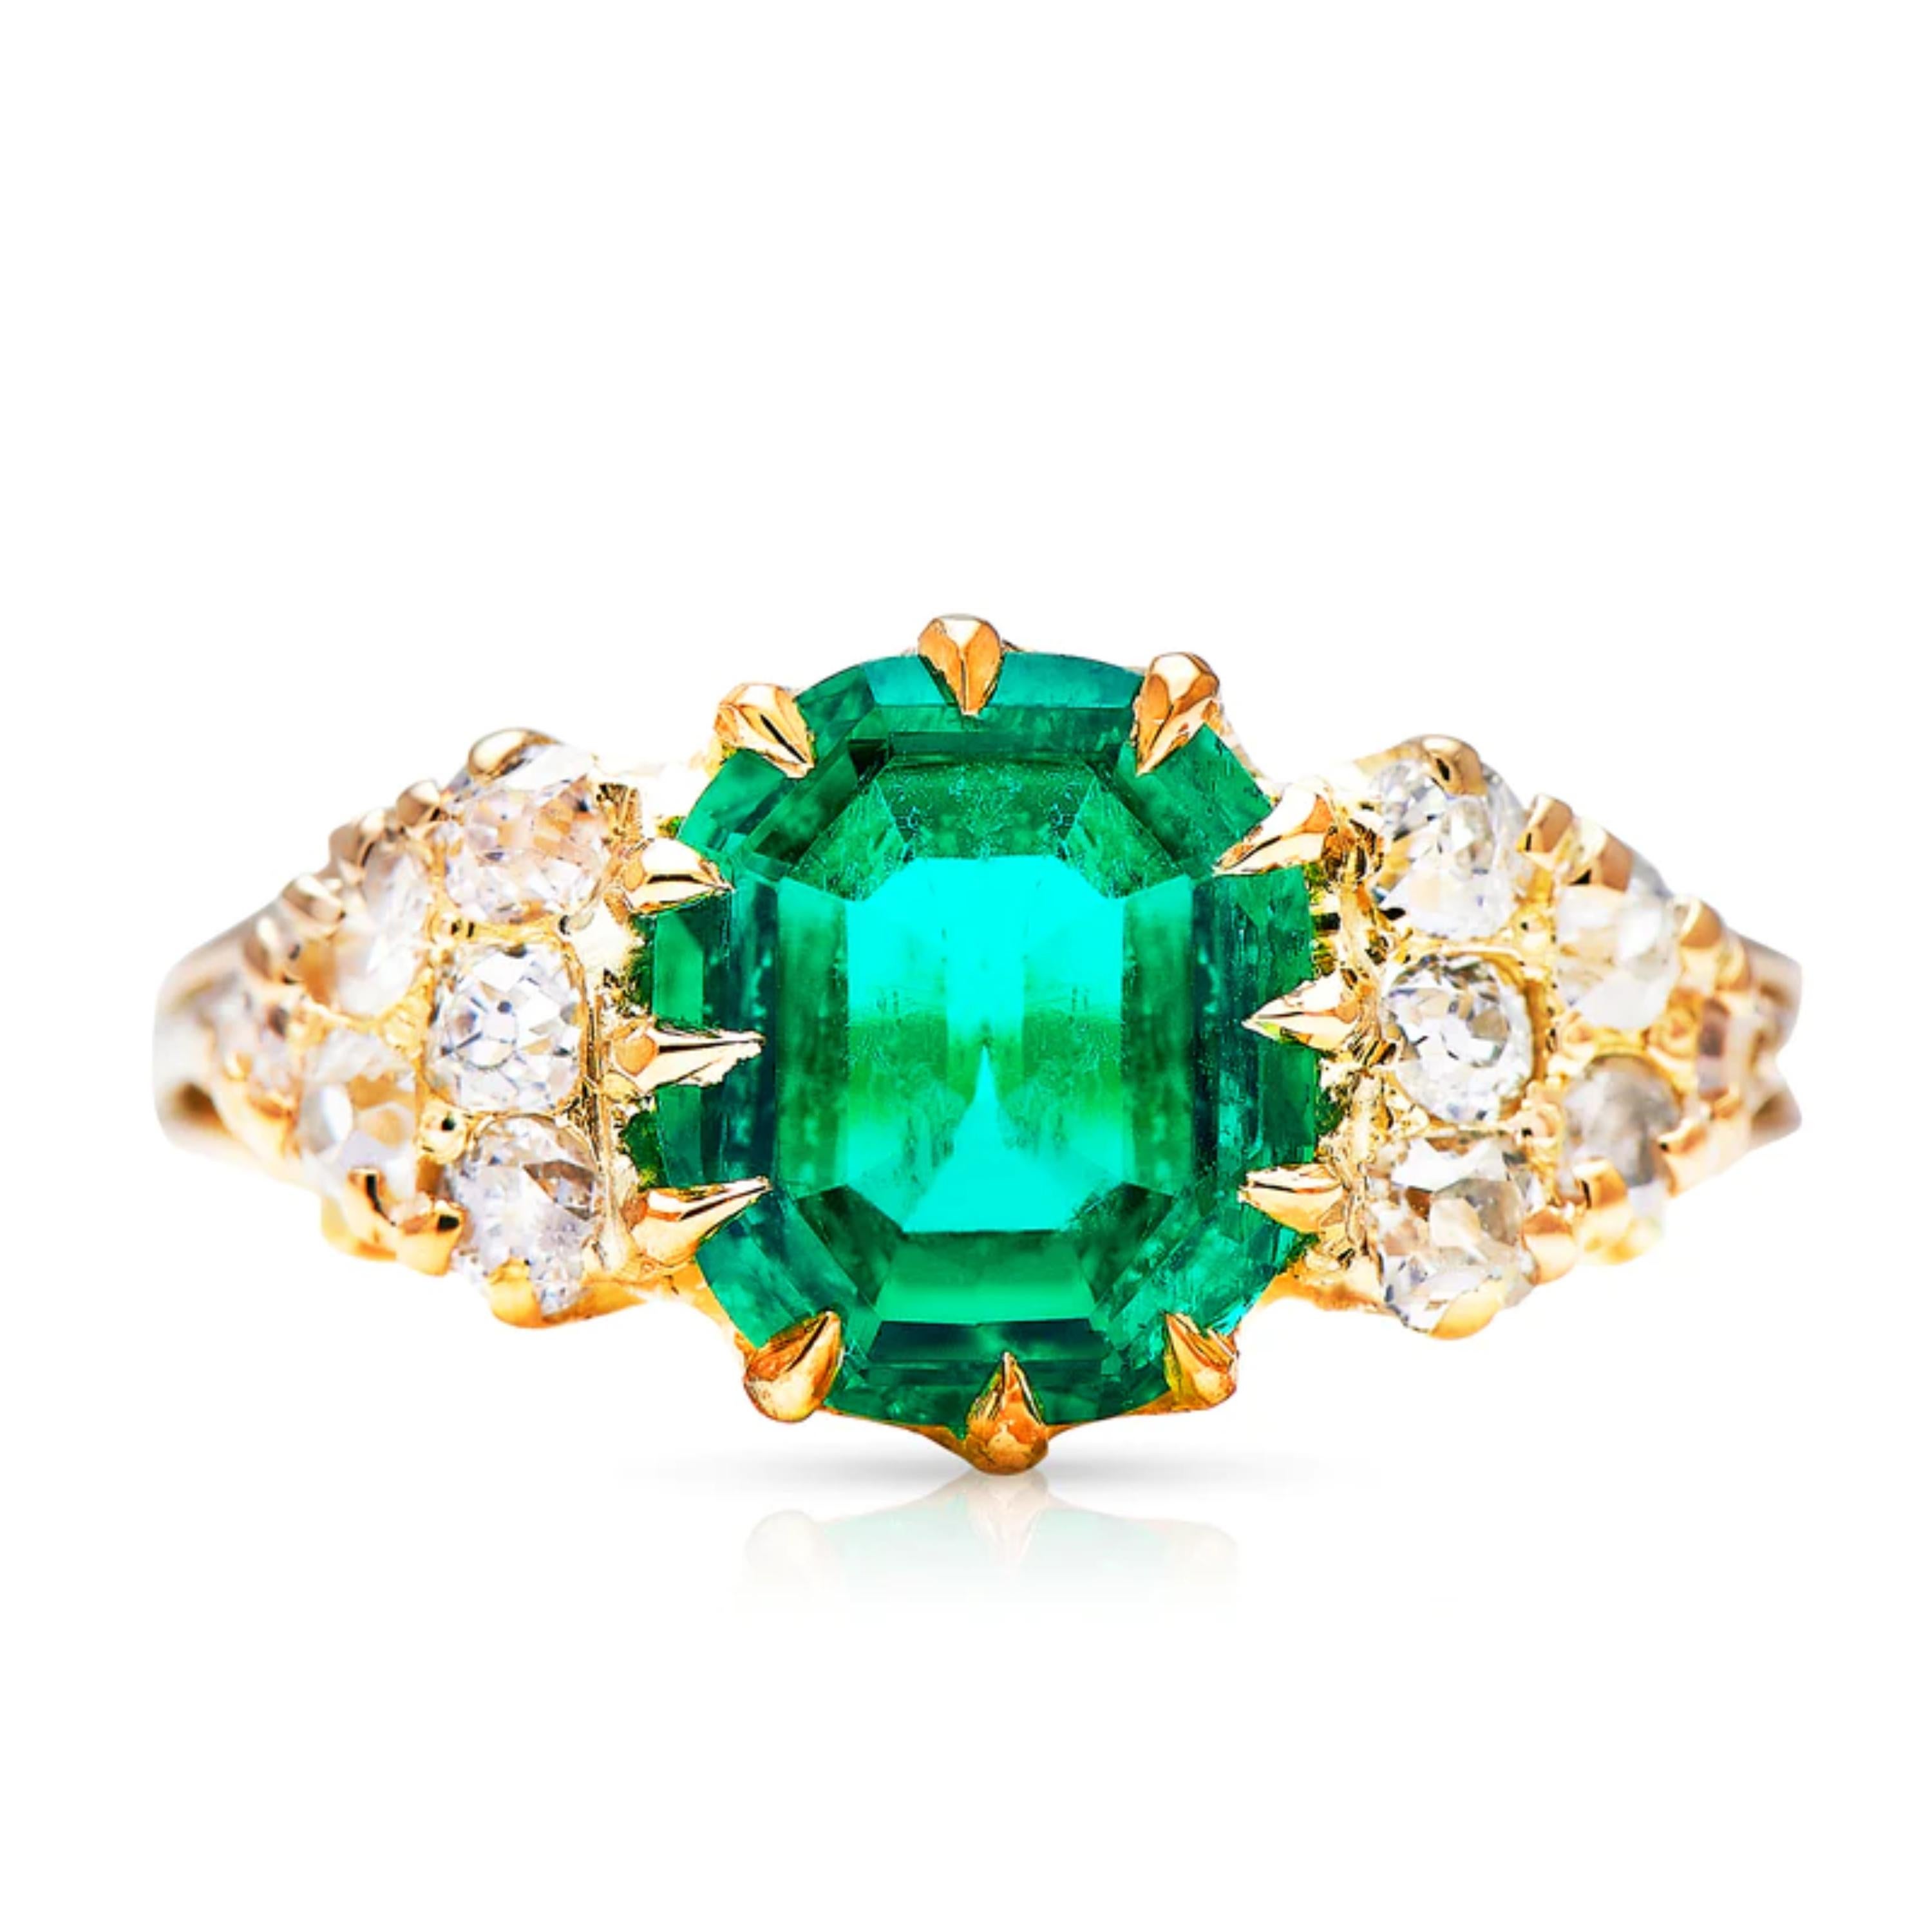 Art Deco Style 2.2 Carat Cushion Cut Emerald Diamond Engagement ring or Cocktail

A stunning ring featuring IGI/GIA Certified 2.20 Carat Natural Emerald and 0.25 Carat of Diamond Accents set in 18K Solid Gold.

Emeralds are highly valued for their